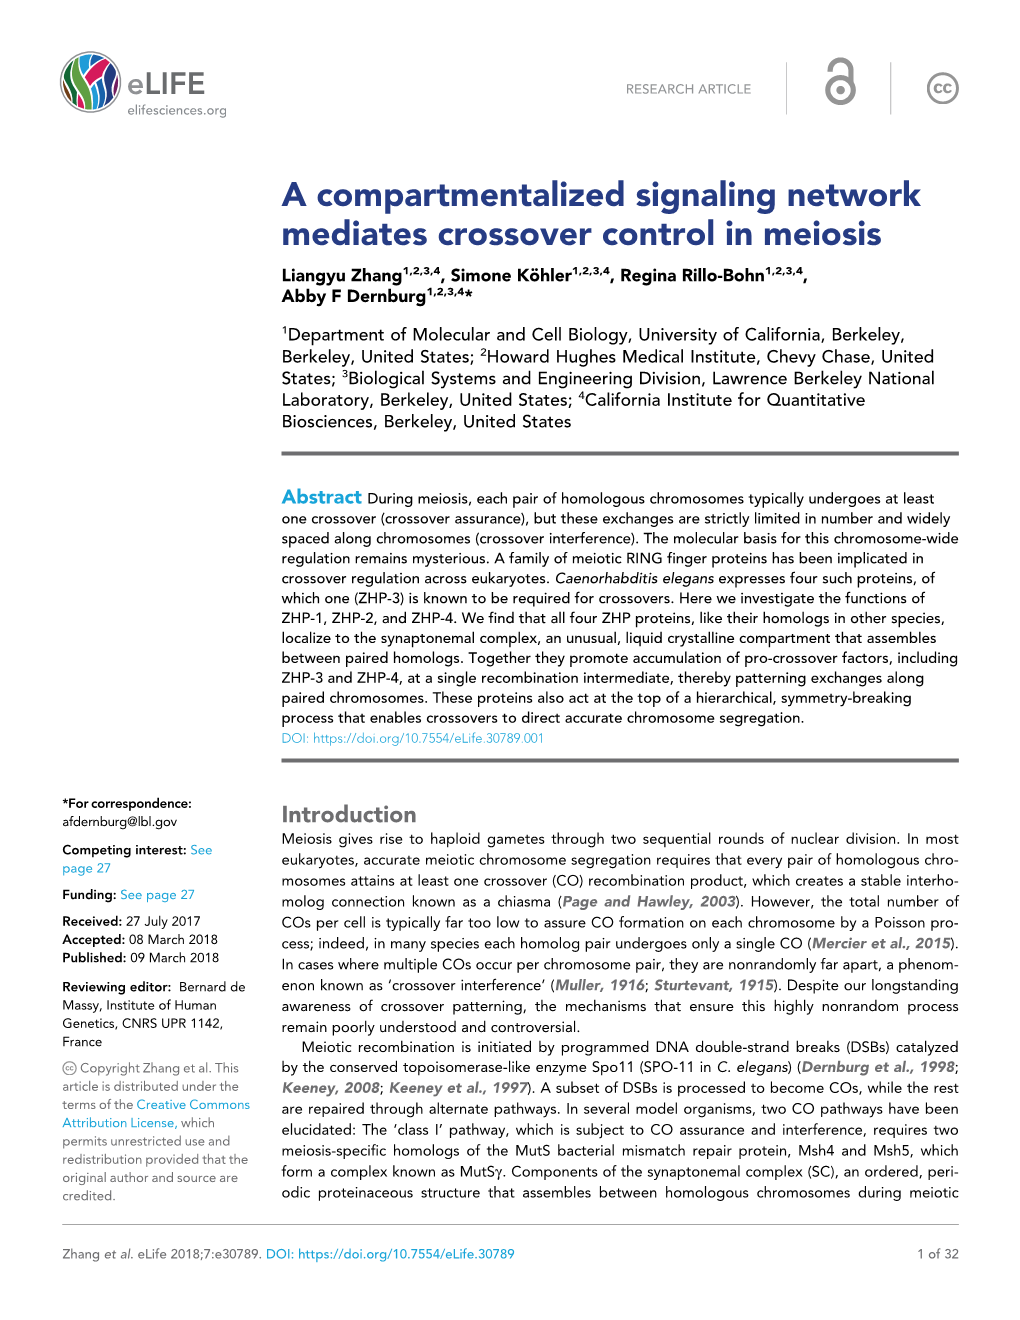 A Compartmentalized Signaling Network Mediates Crossover Control